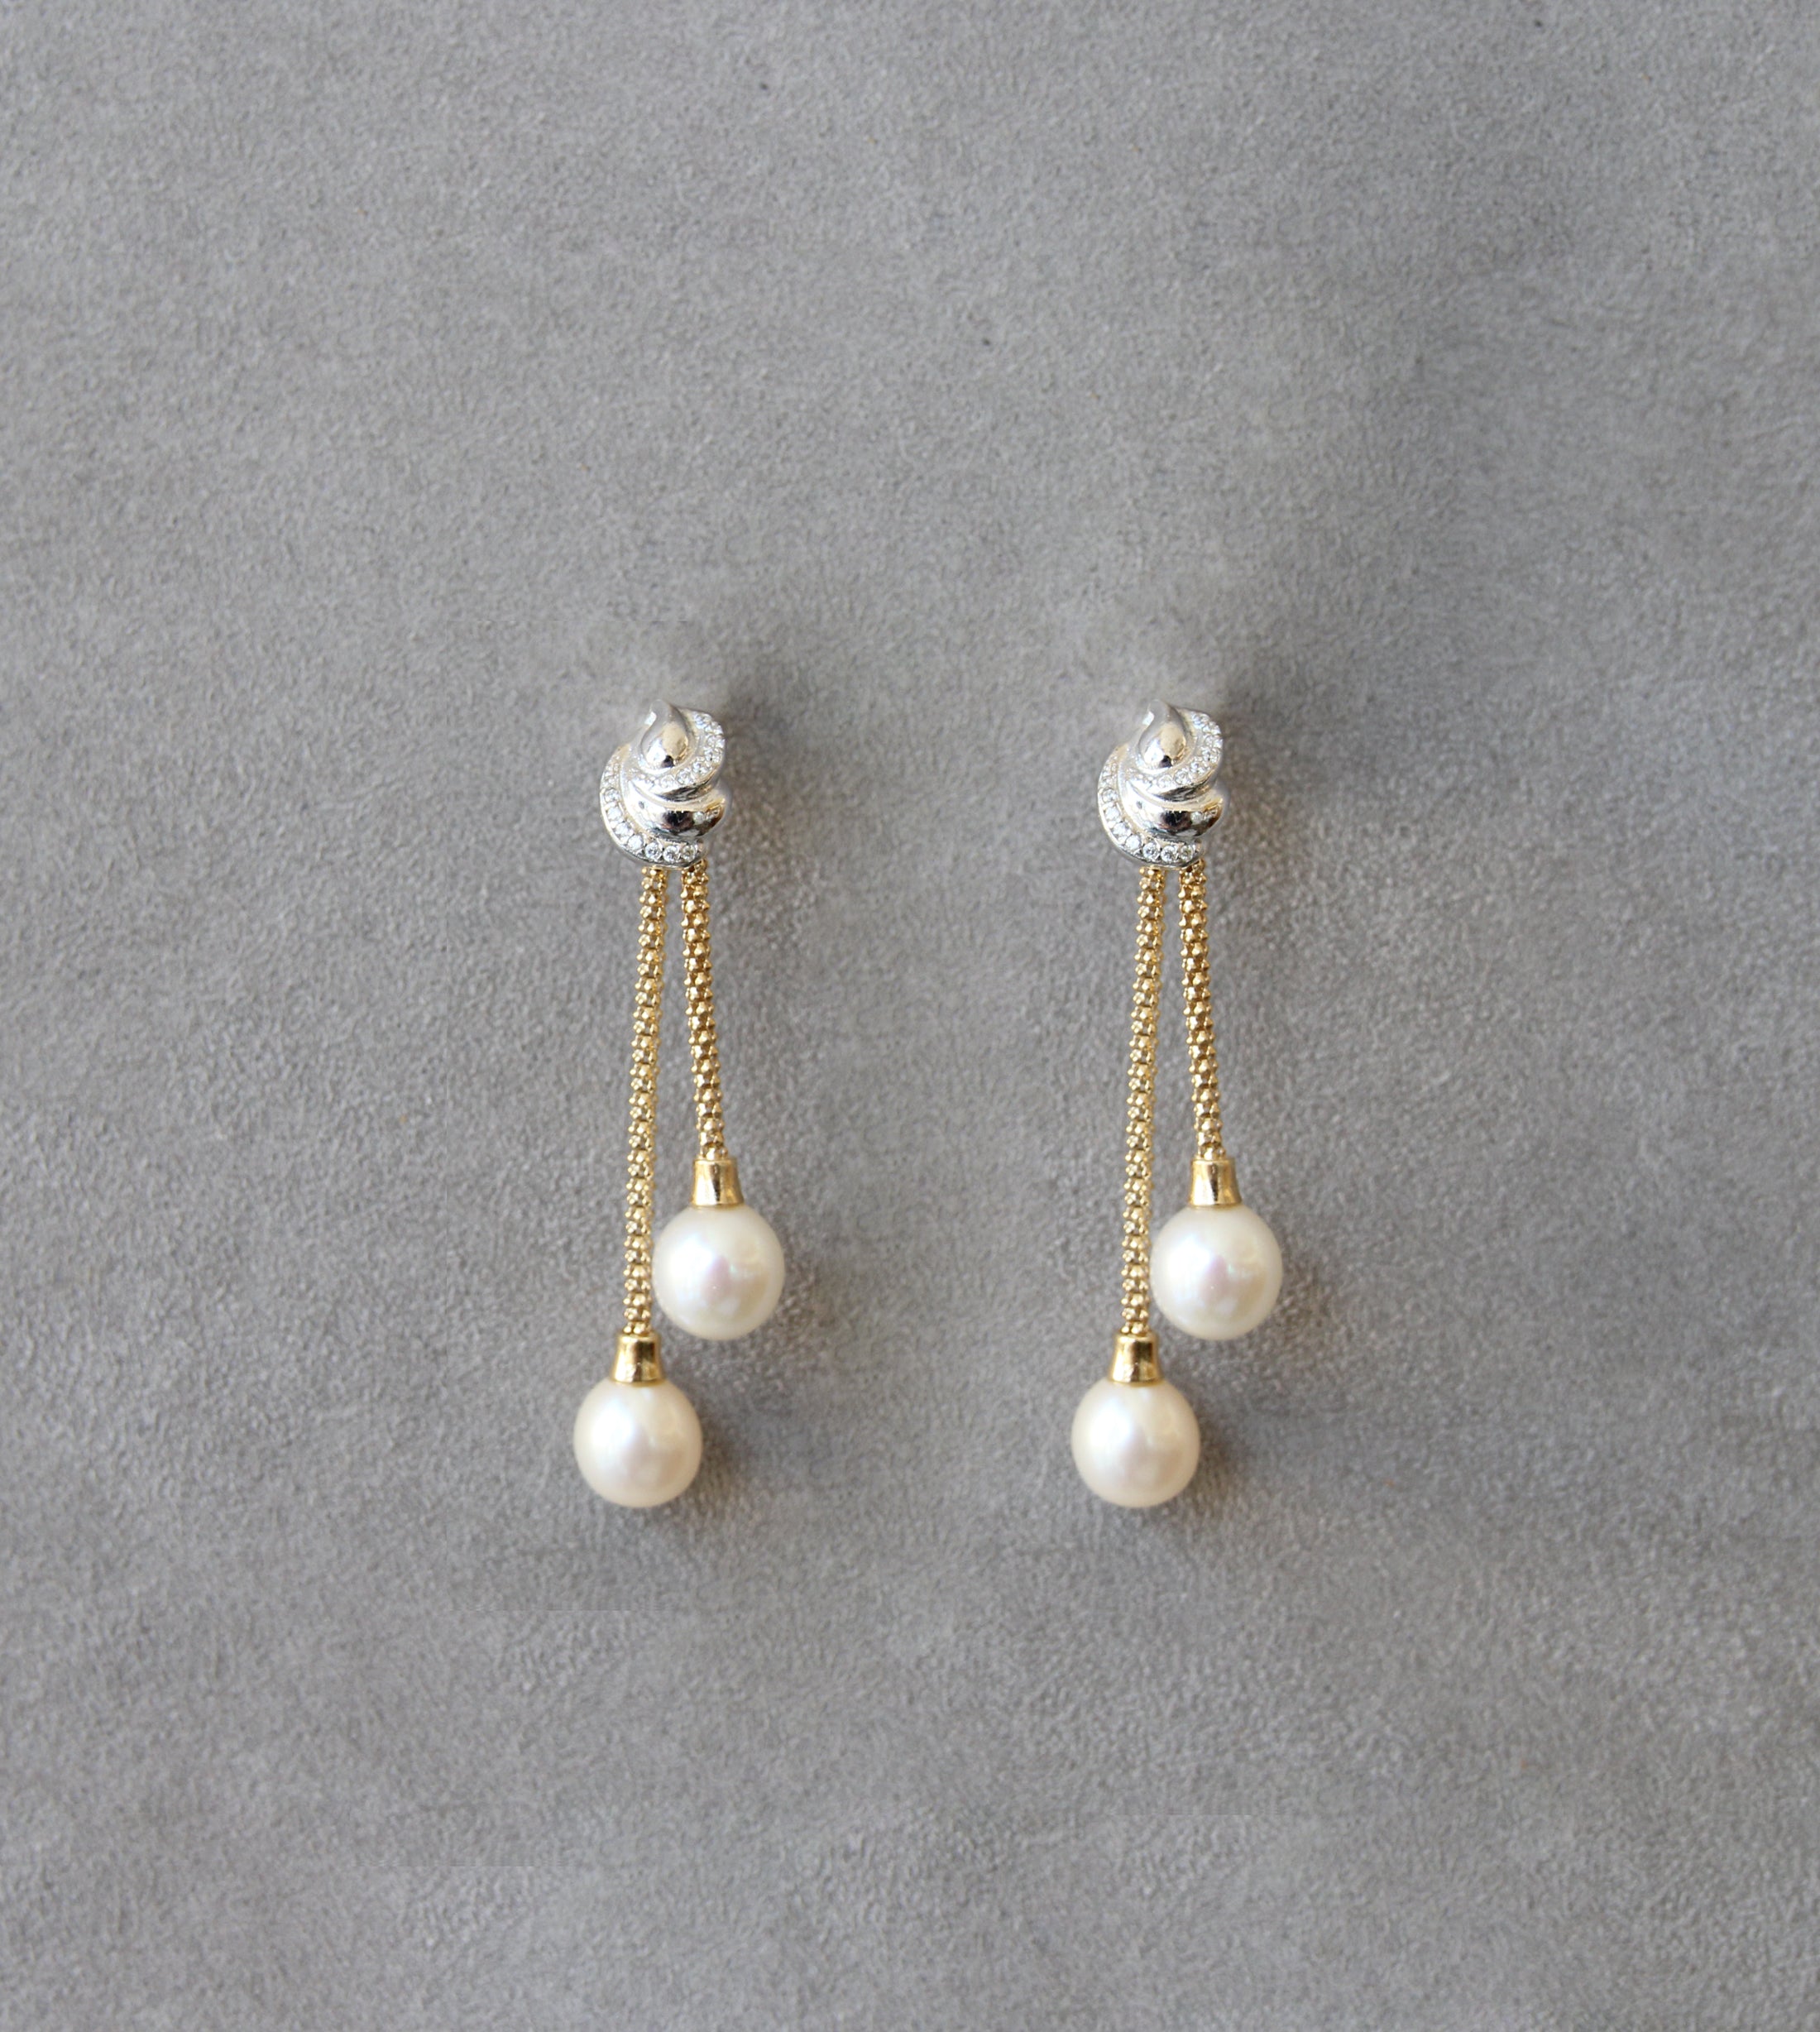 Silver 925 Earrings with Cultured Pearls